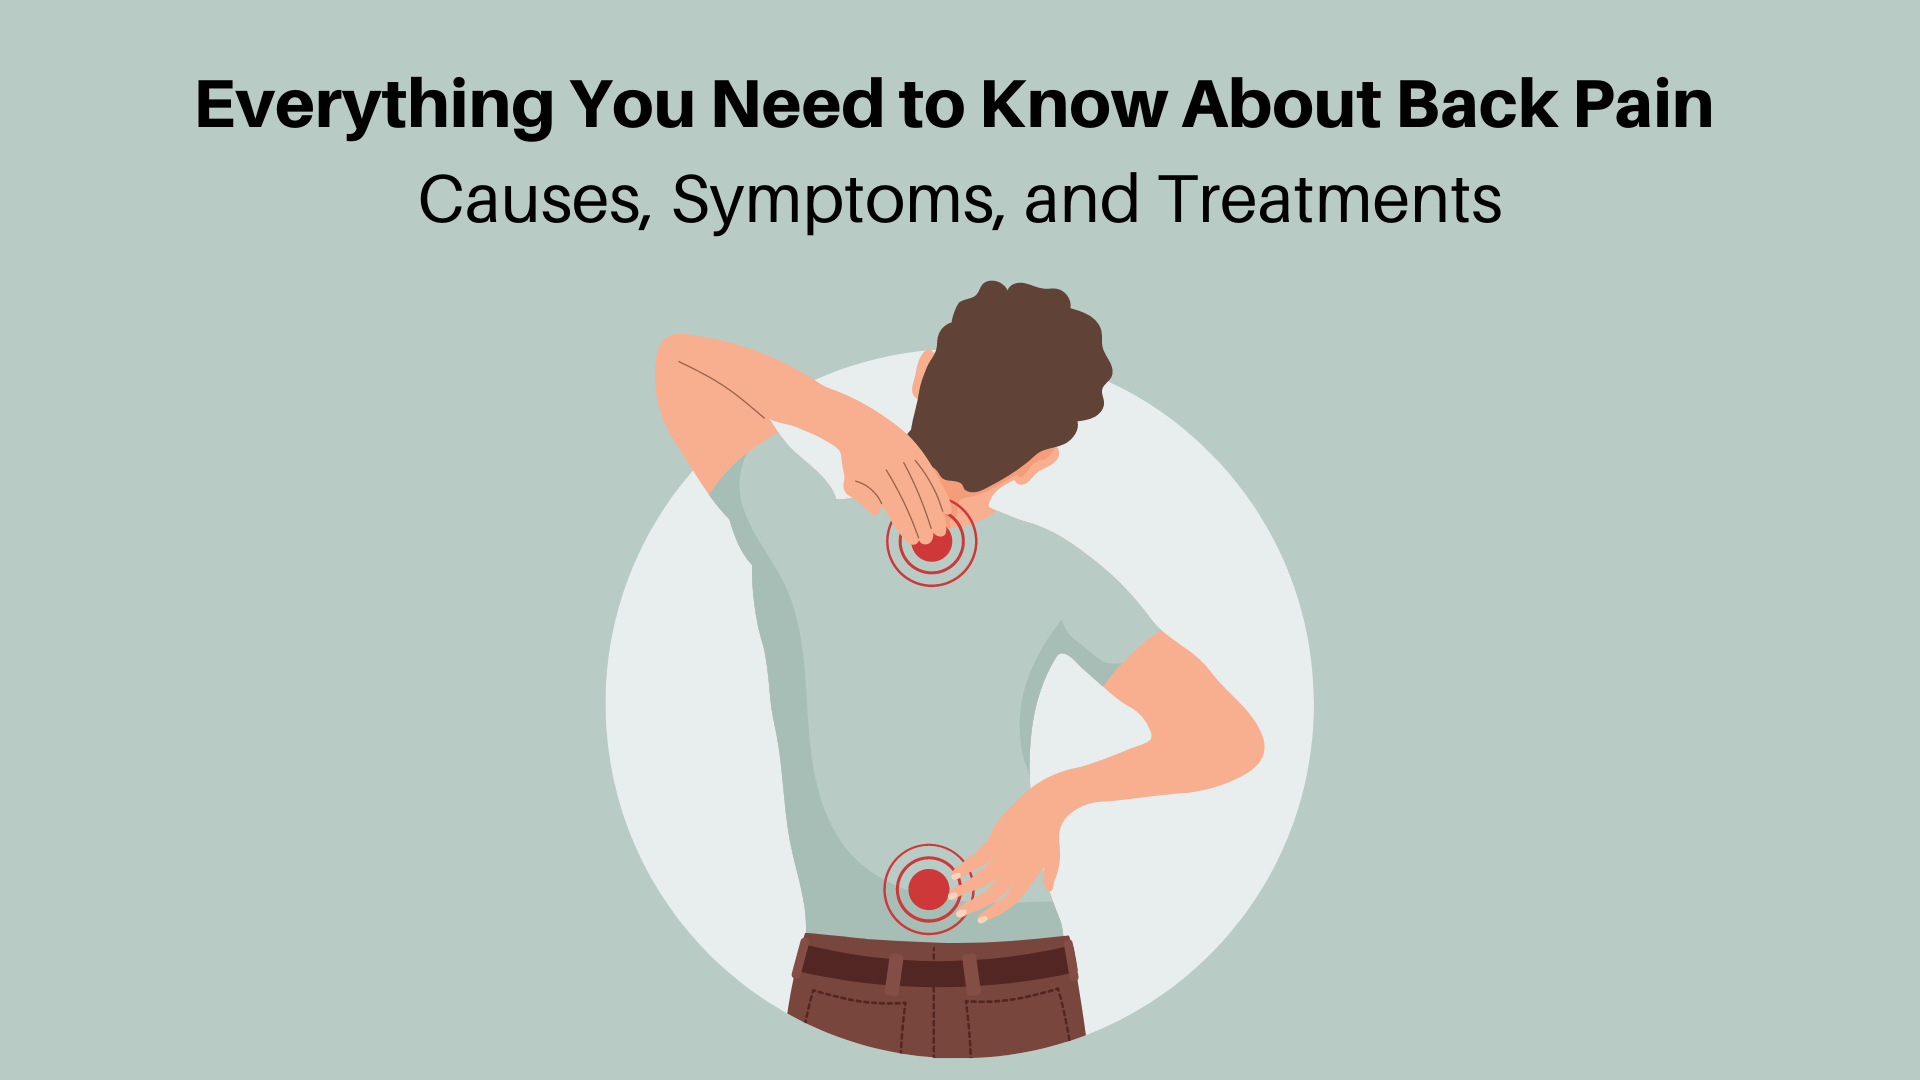 Everything You Need to Know About Back Pain Causes, Symptoms, and Treatments